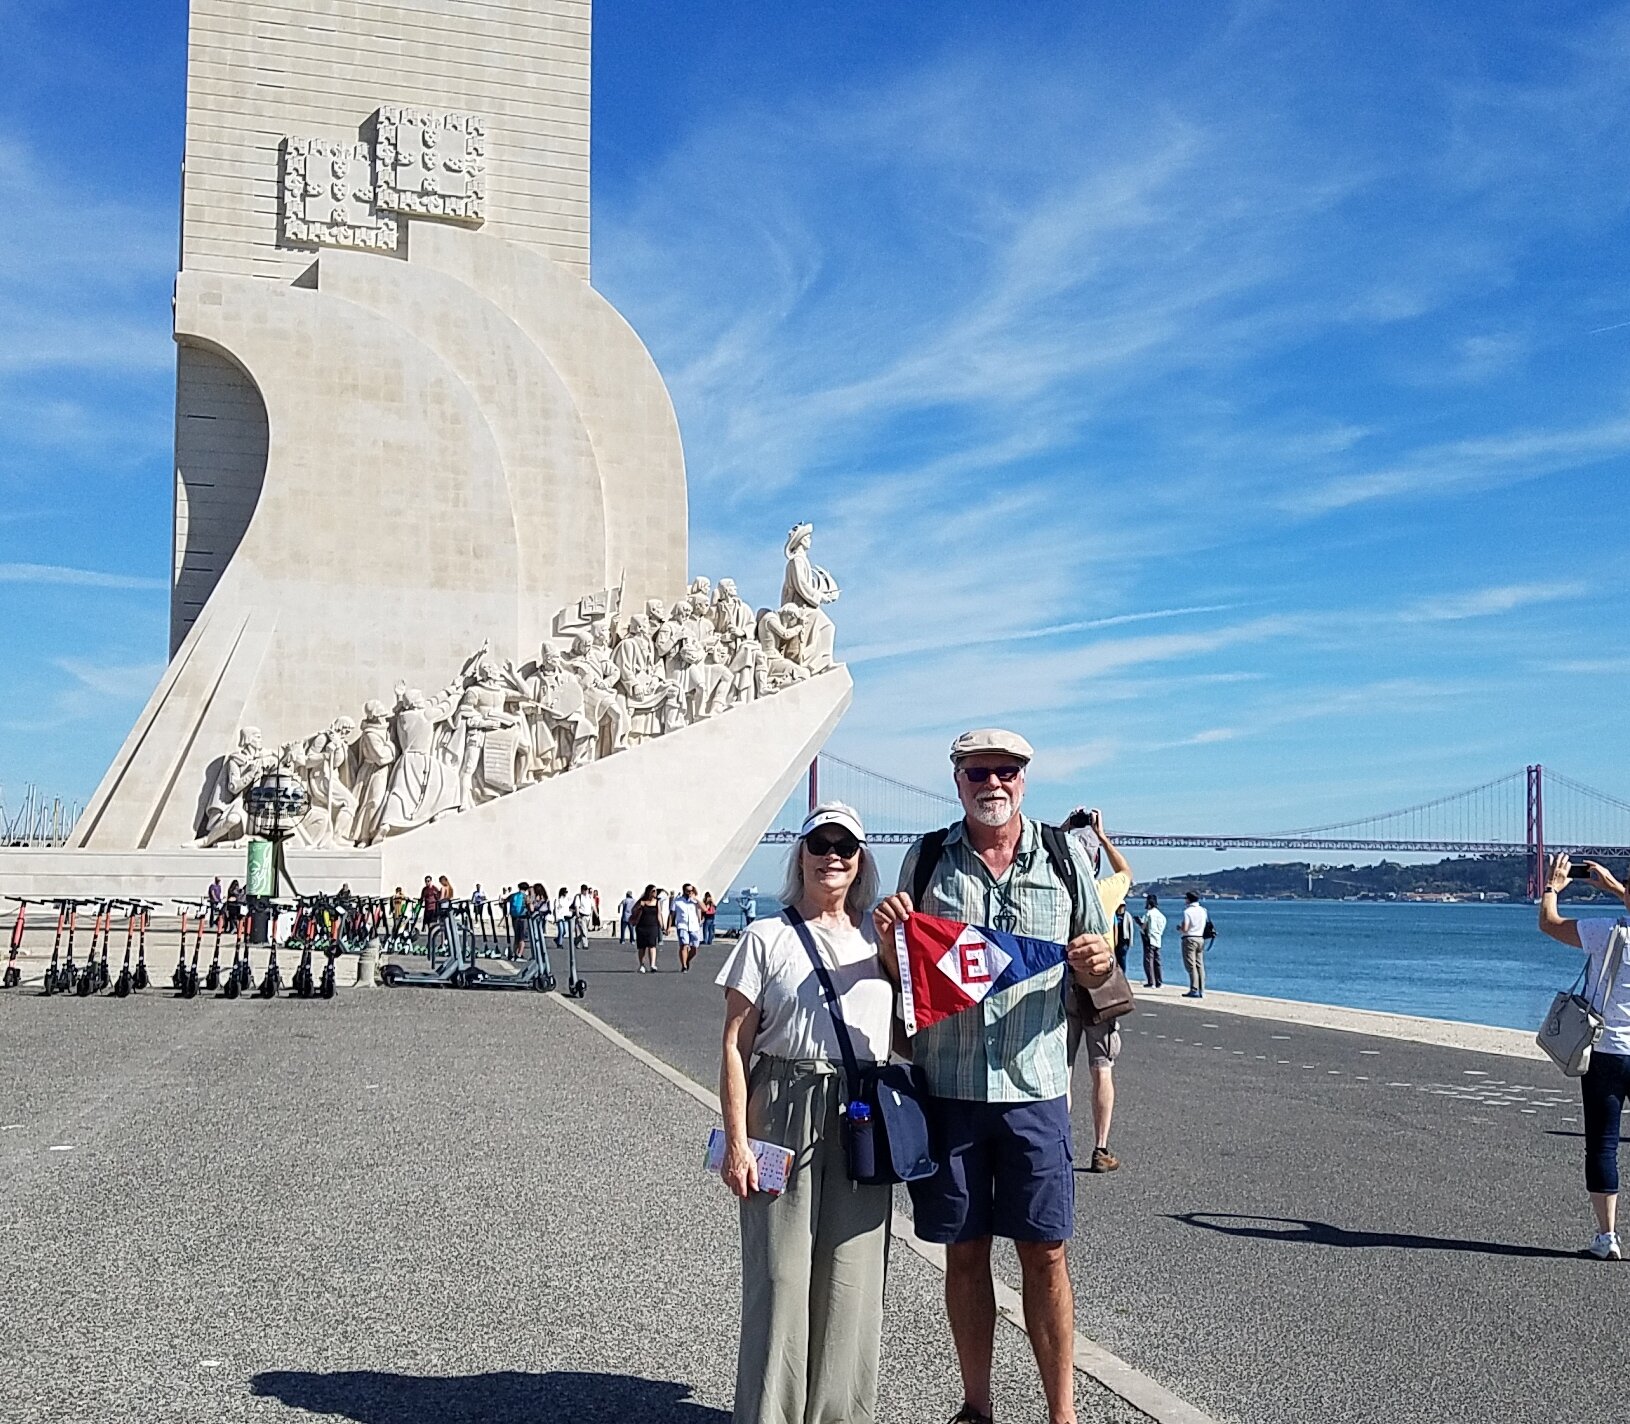  Linda and Murray show the colors in front of the Vasco de Gama Memorial in Lisbon, Portugal 